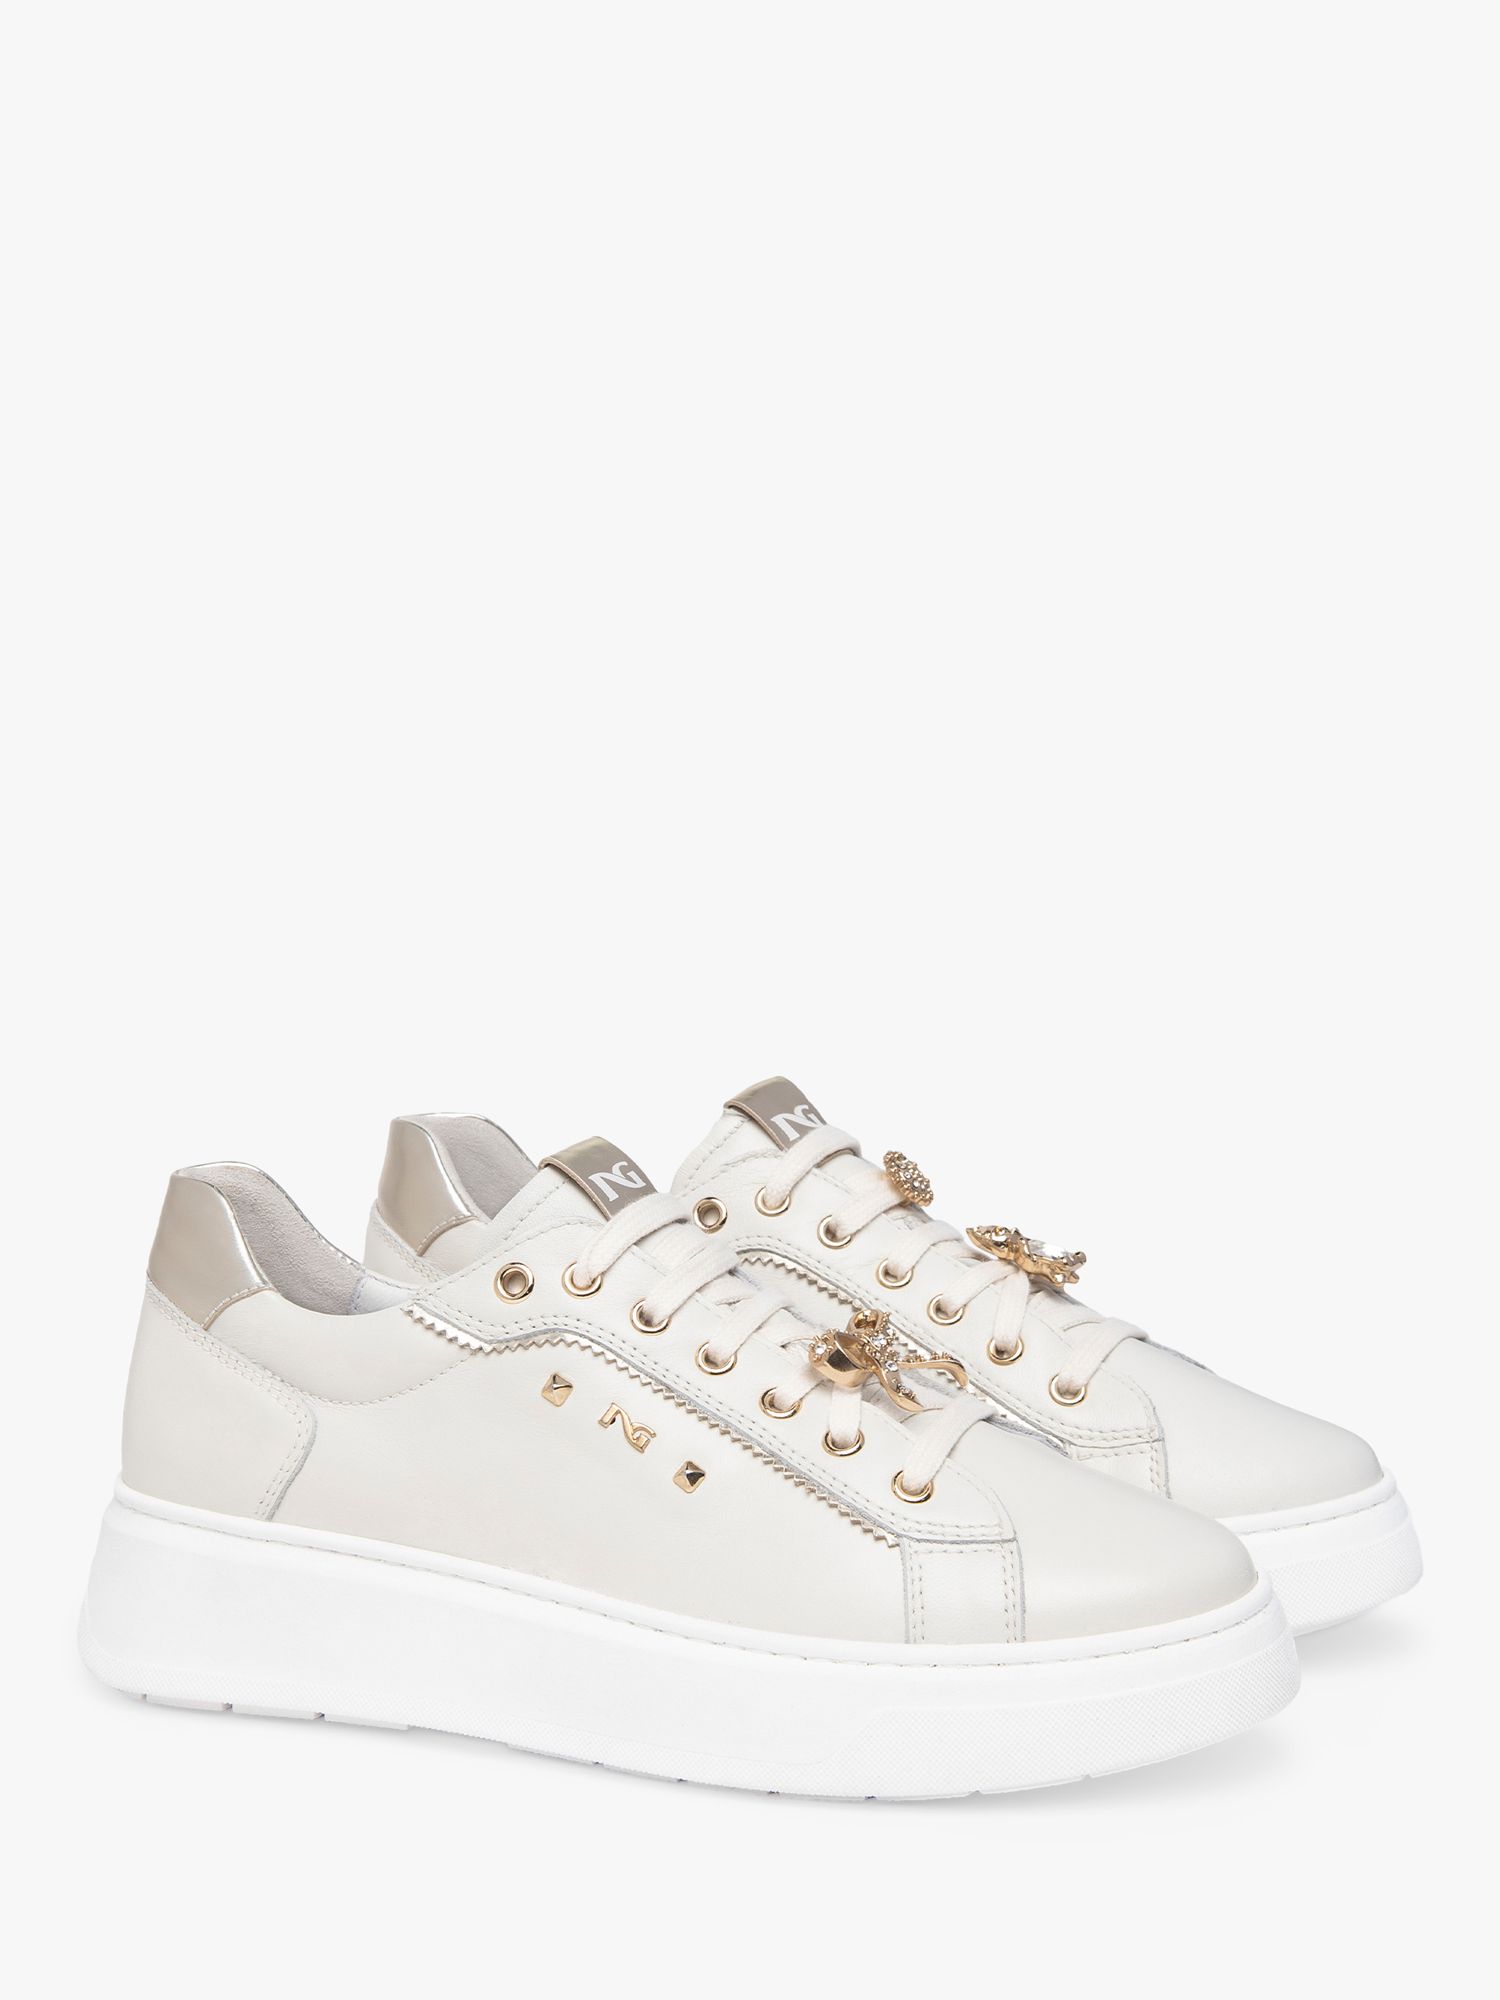 Buy NeroGiardini Leather Low Top Trainers Online at johnlewis.com